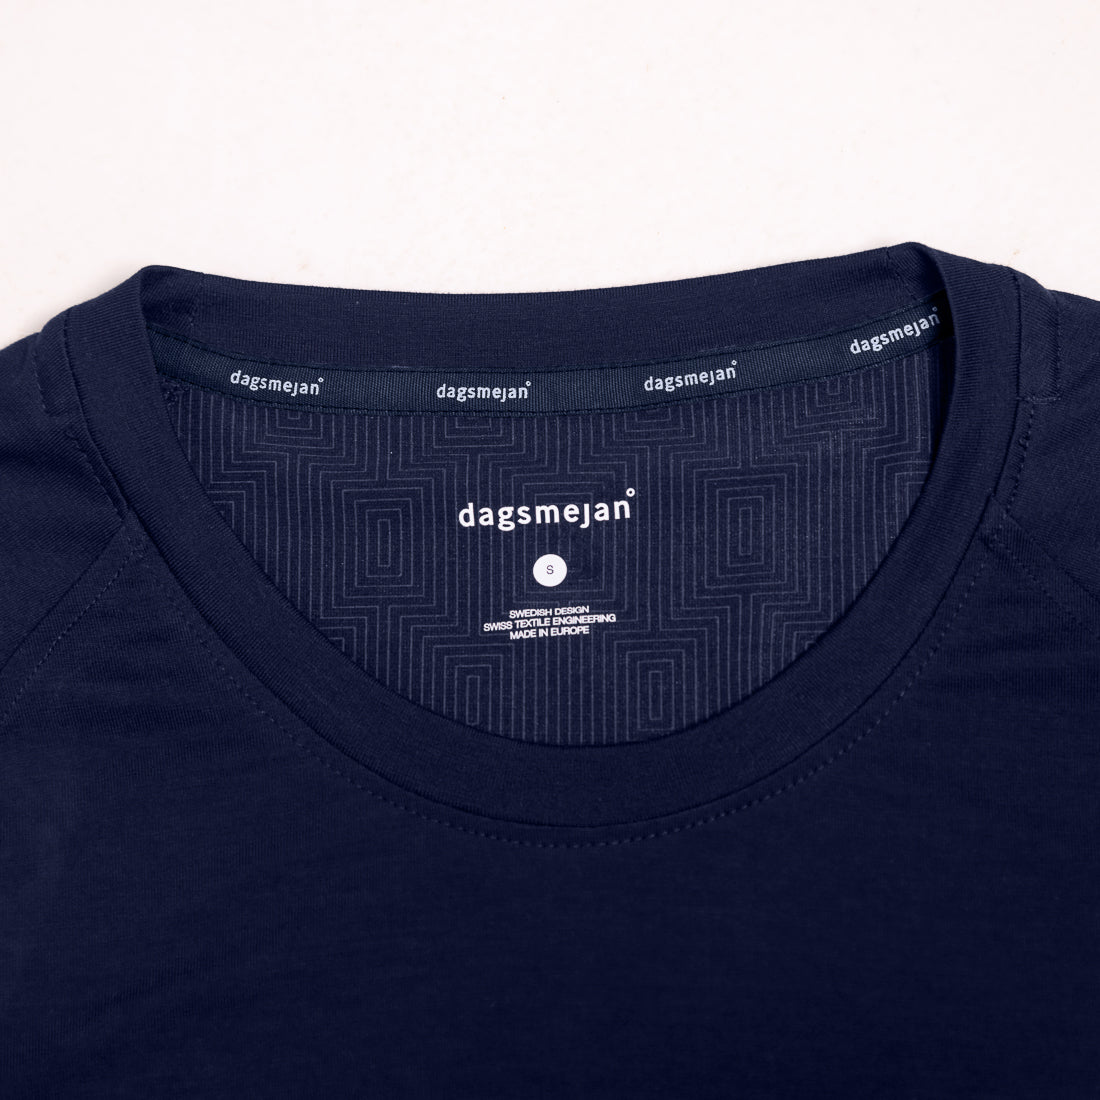 Muscle recovery sleep t-shirt || Navy